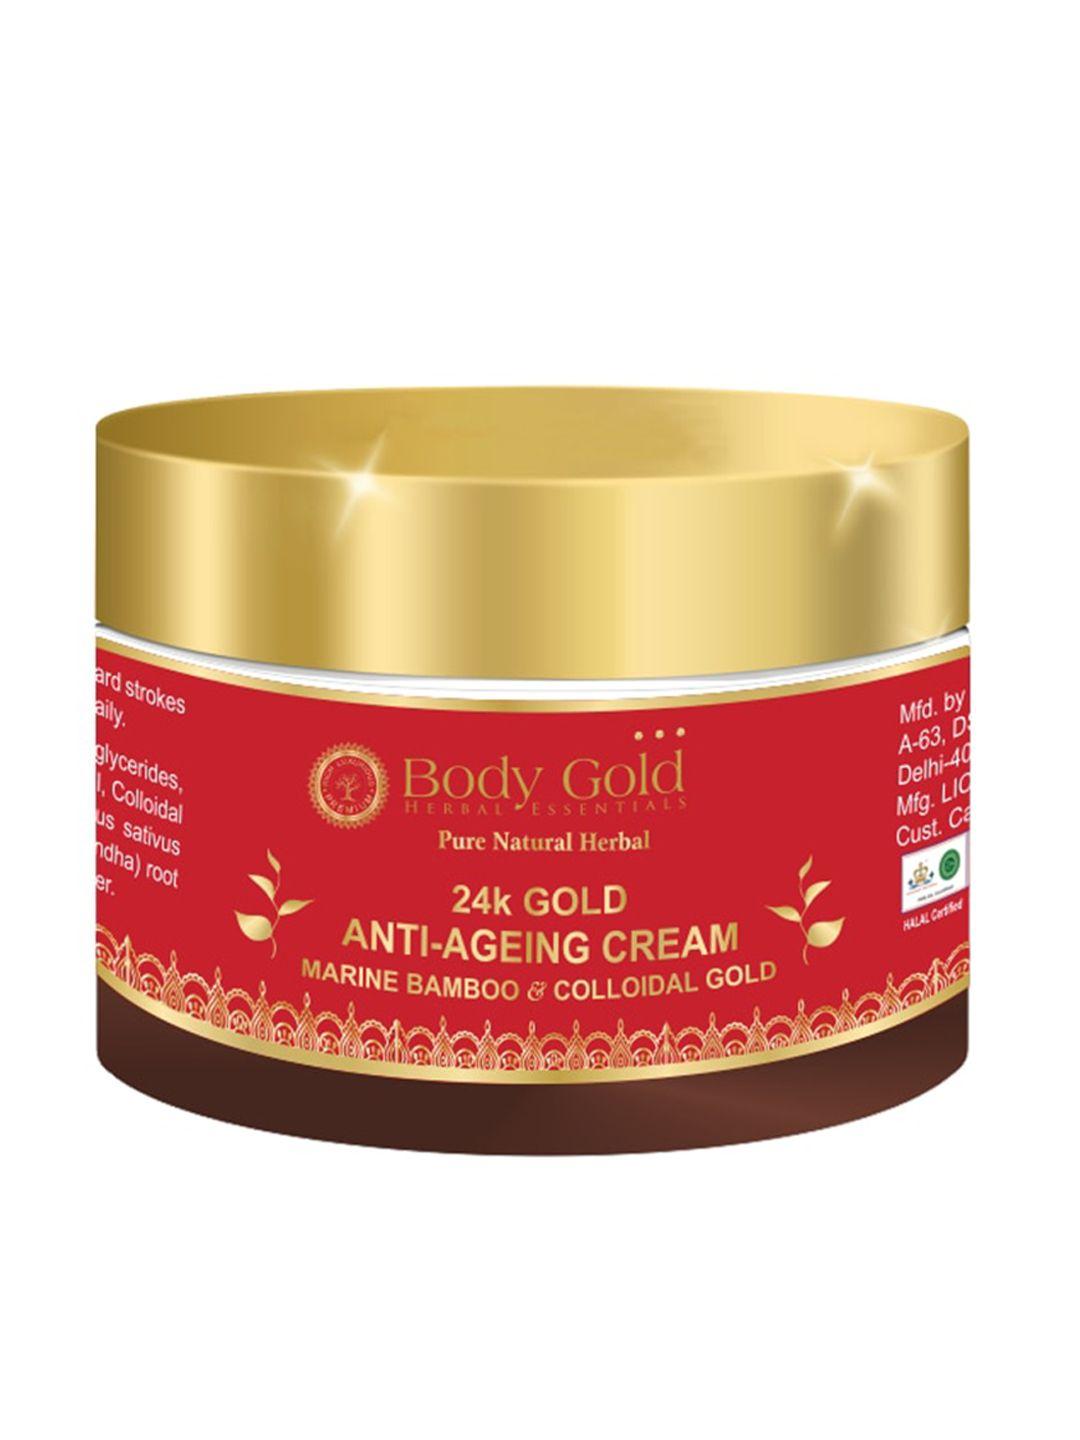 body gold 24 k gold anti-aging creme with marine bamboo 50gm